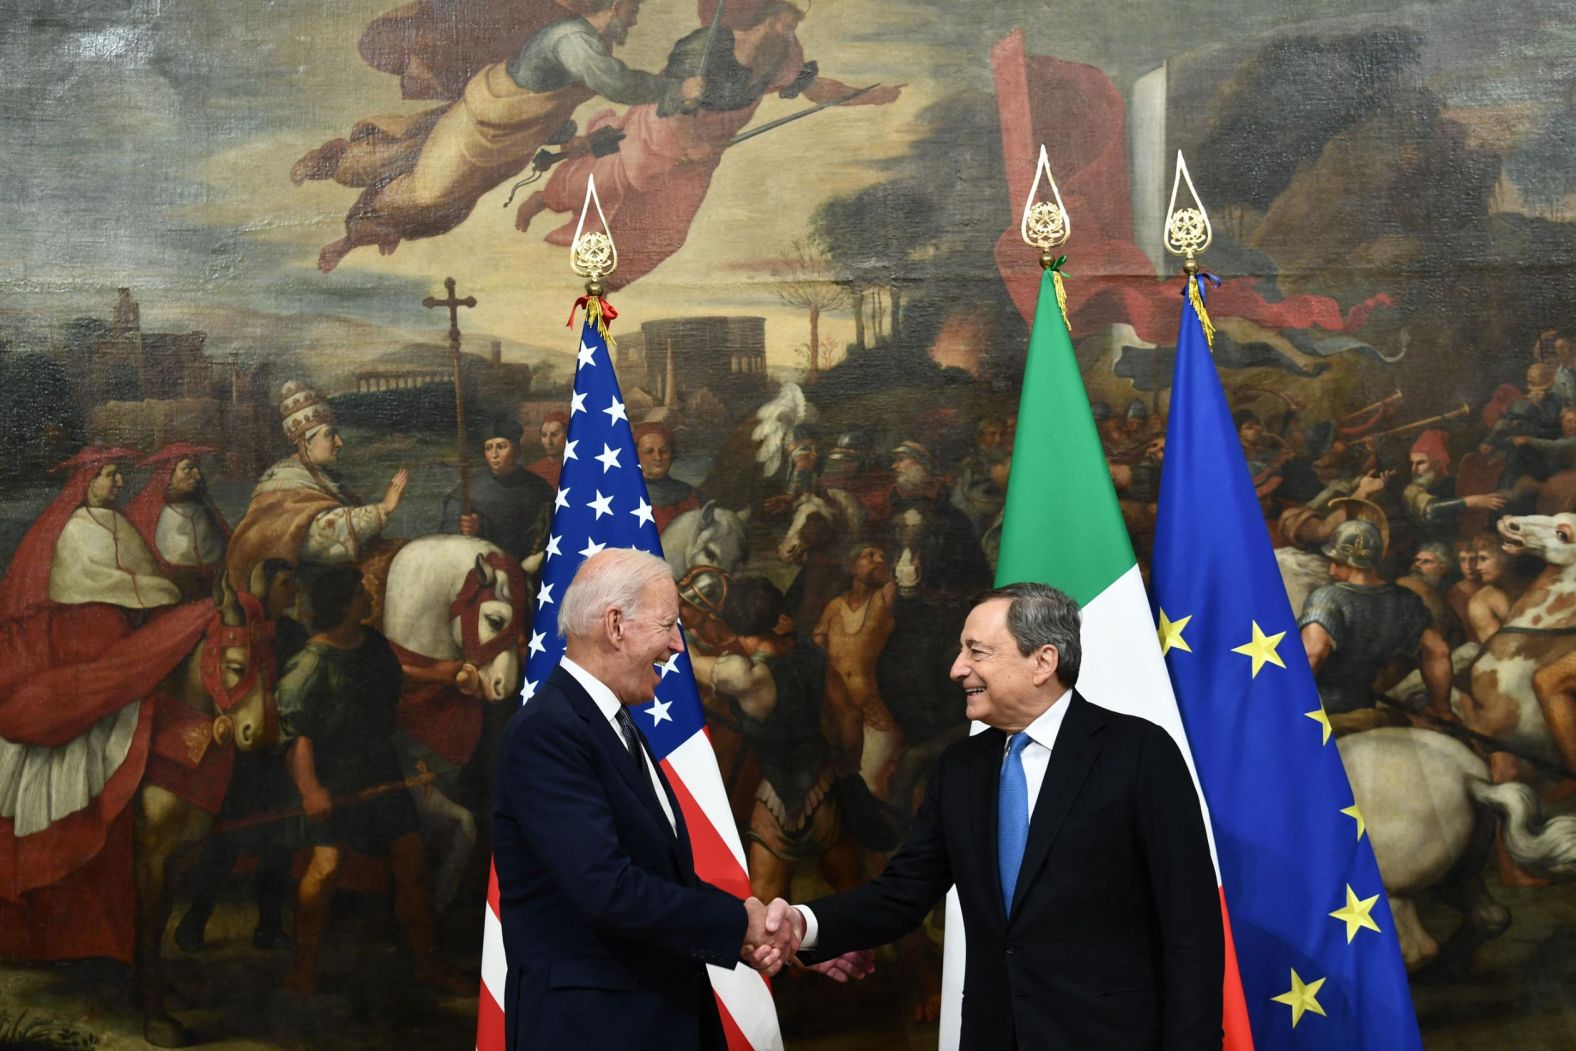 Biden shakes hands with Italian Prime Minister Mario Draghi during <a href="index.php?page=&url=https%3A%2F%2Fwww.cnn.com%2F2021%2F10%2F29%2Fpolitics%2Fmario-draghi-sergio-mattarella-biden-meeting%2Findex.html" target="_blank">their meeting</a> at the Chigi Palace in Rome on Friday. He also had a bilateral meeting with Italian President Sergio Mattarella at the Quirinale Palace.